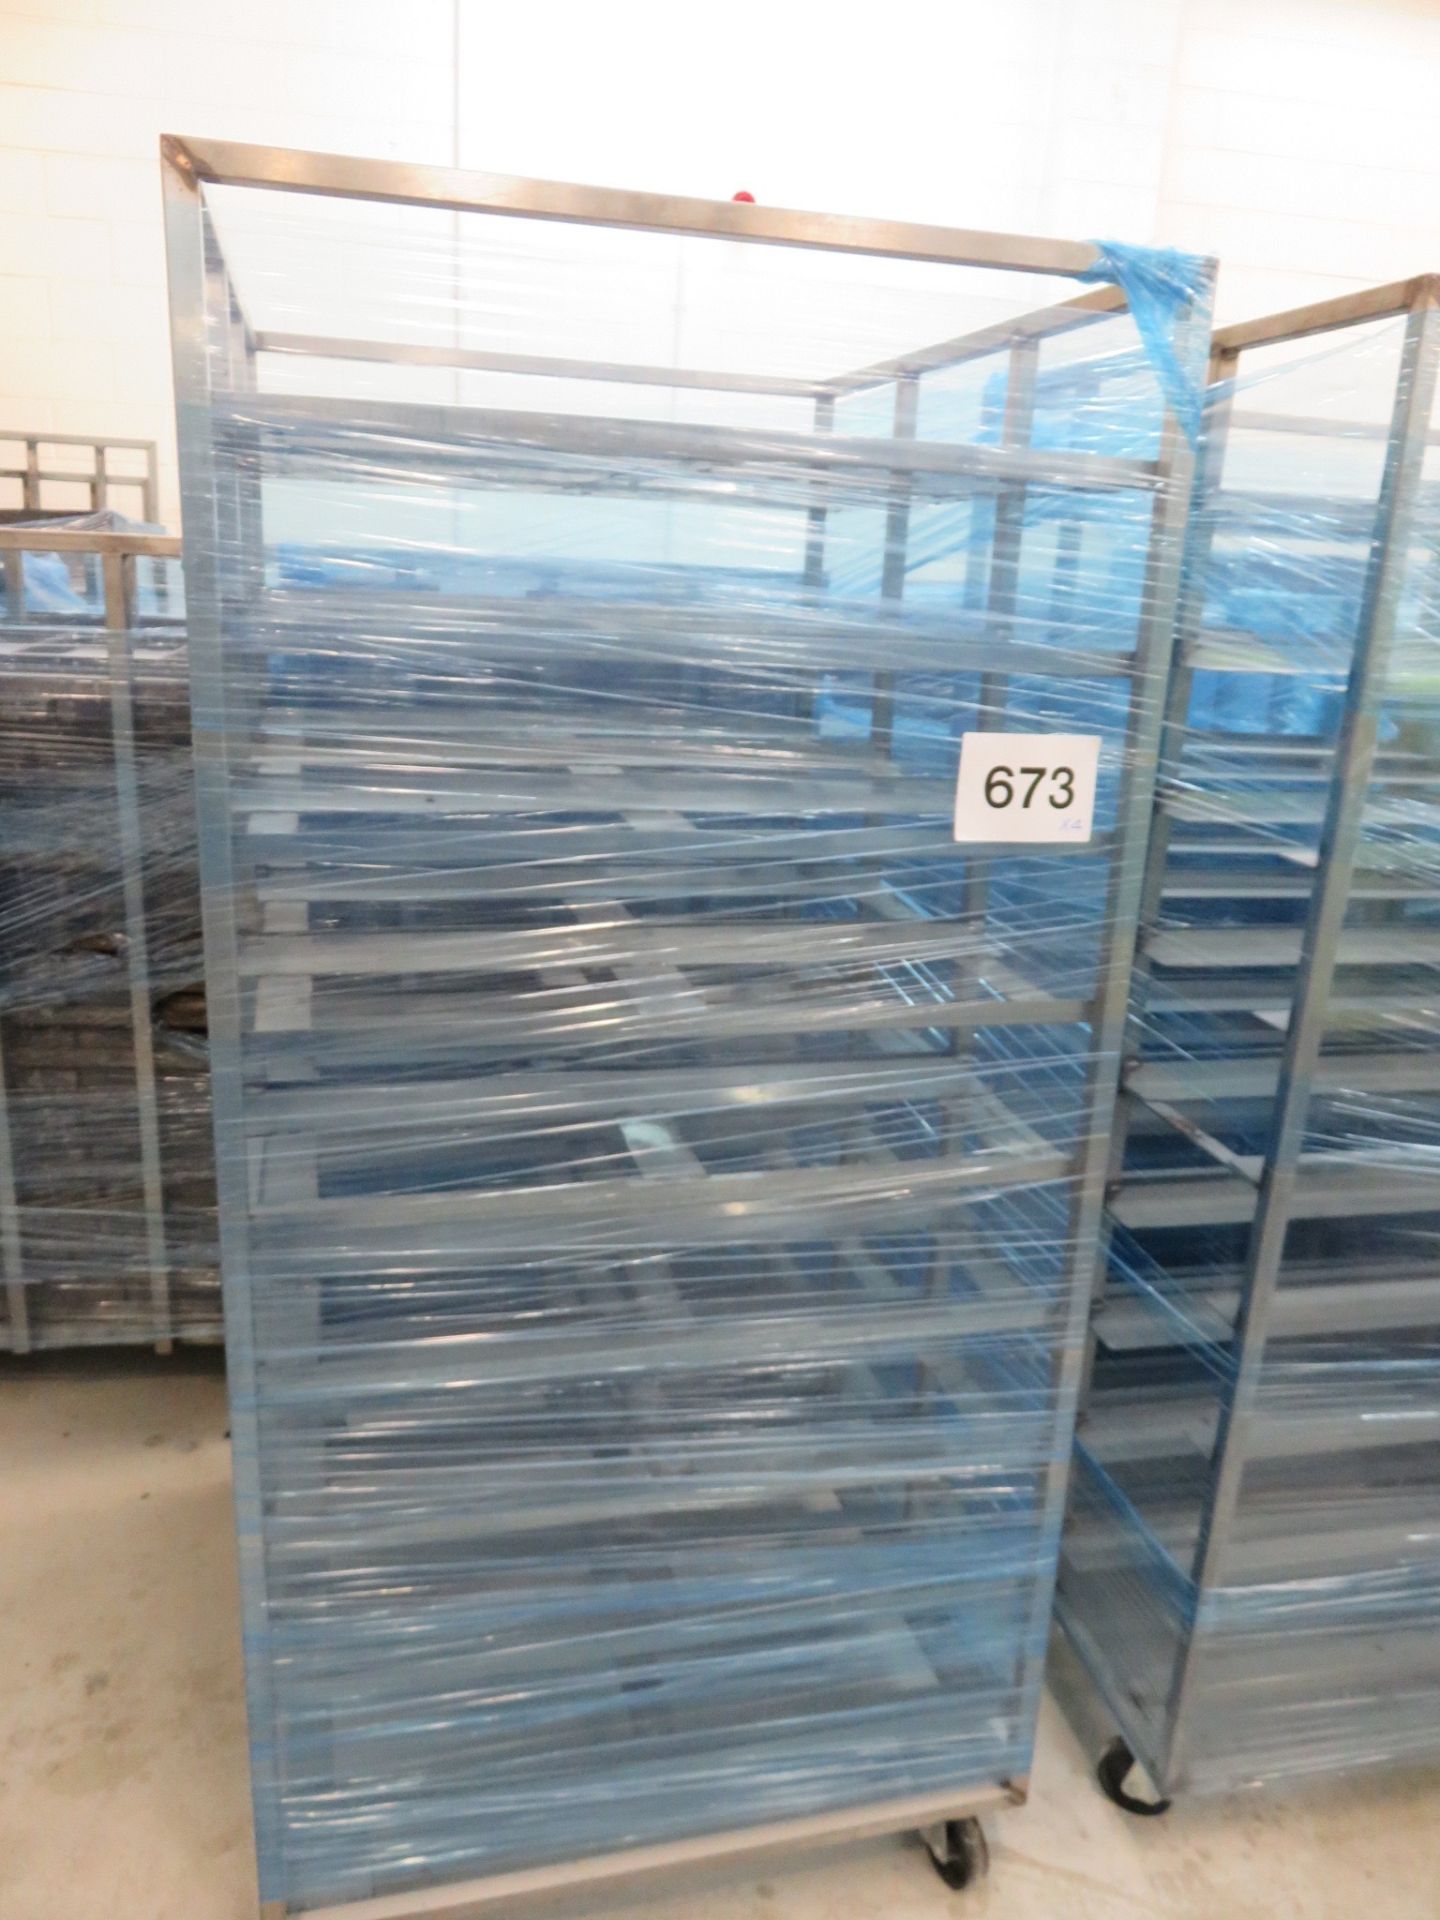 4 x mobile Trolleys 1.8 high x 1 meter. Lift out charge £20